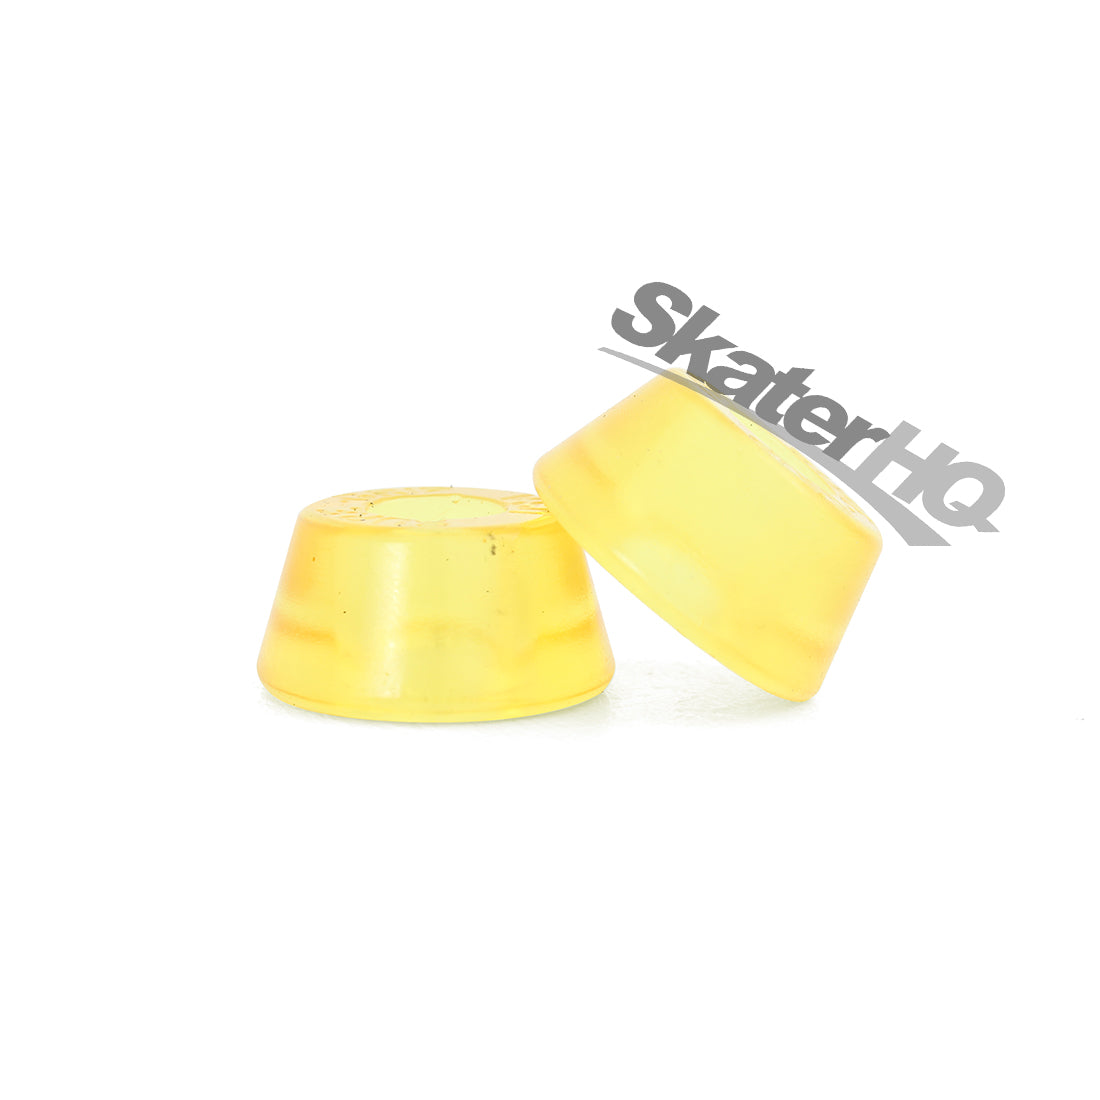 Sure-Grip Conical Cushions 79a 4pk - Yellow Roller Skate Hardware and Parts